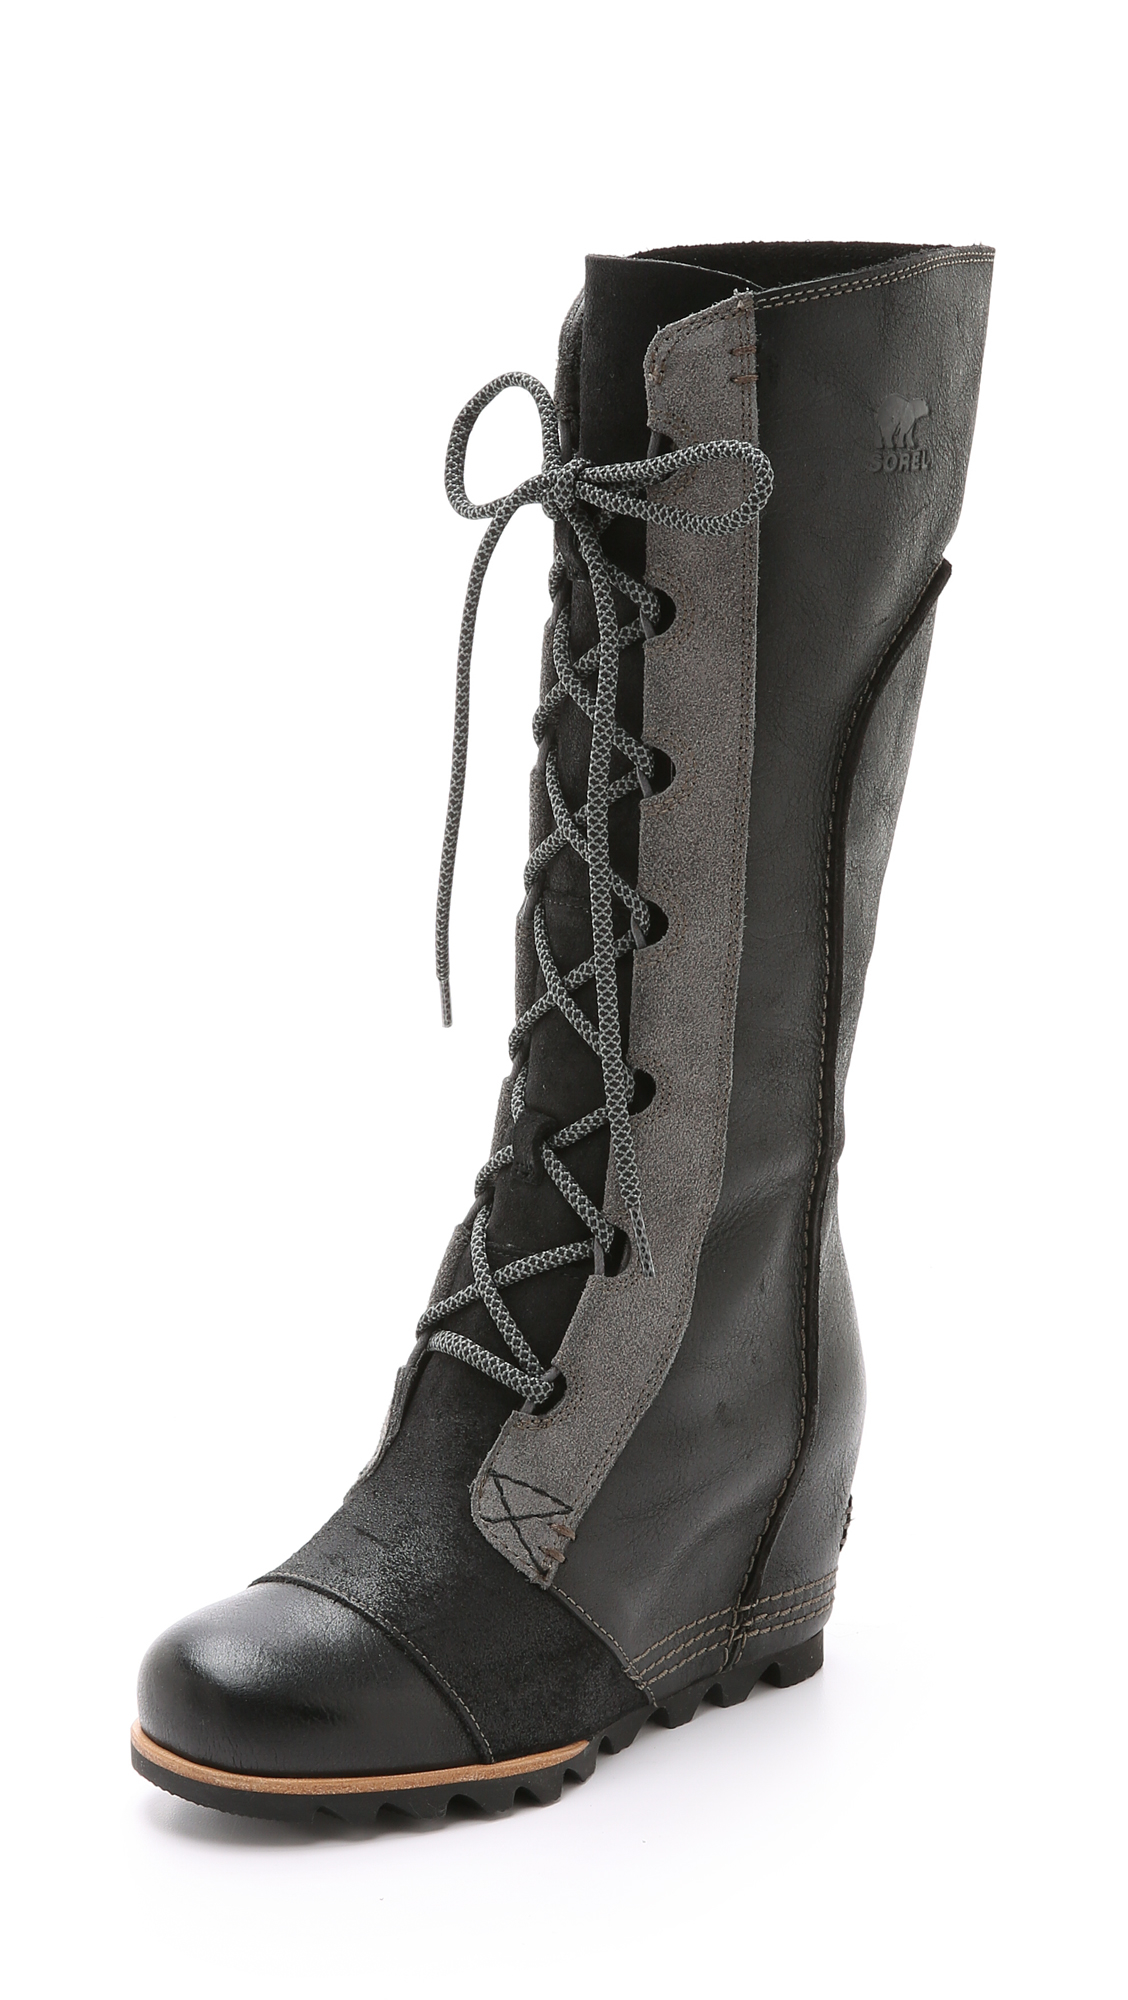 Sorel Cate The Great Wedge Boots - Black - Lyst